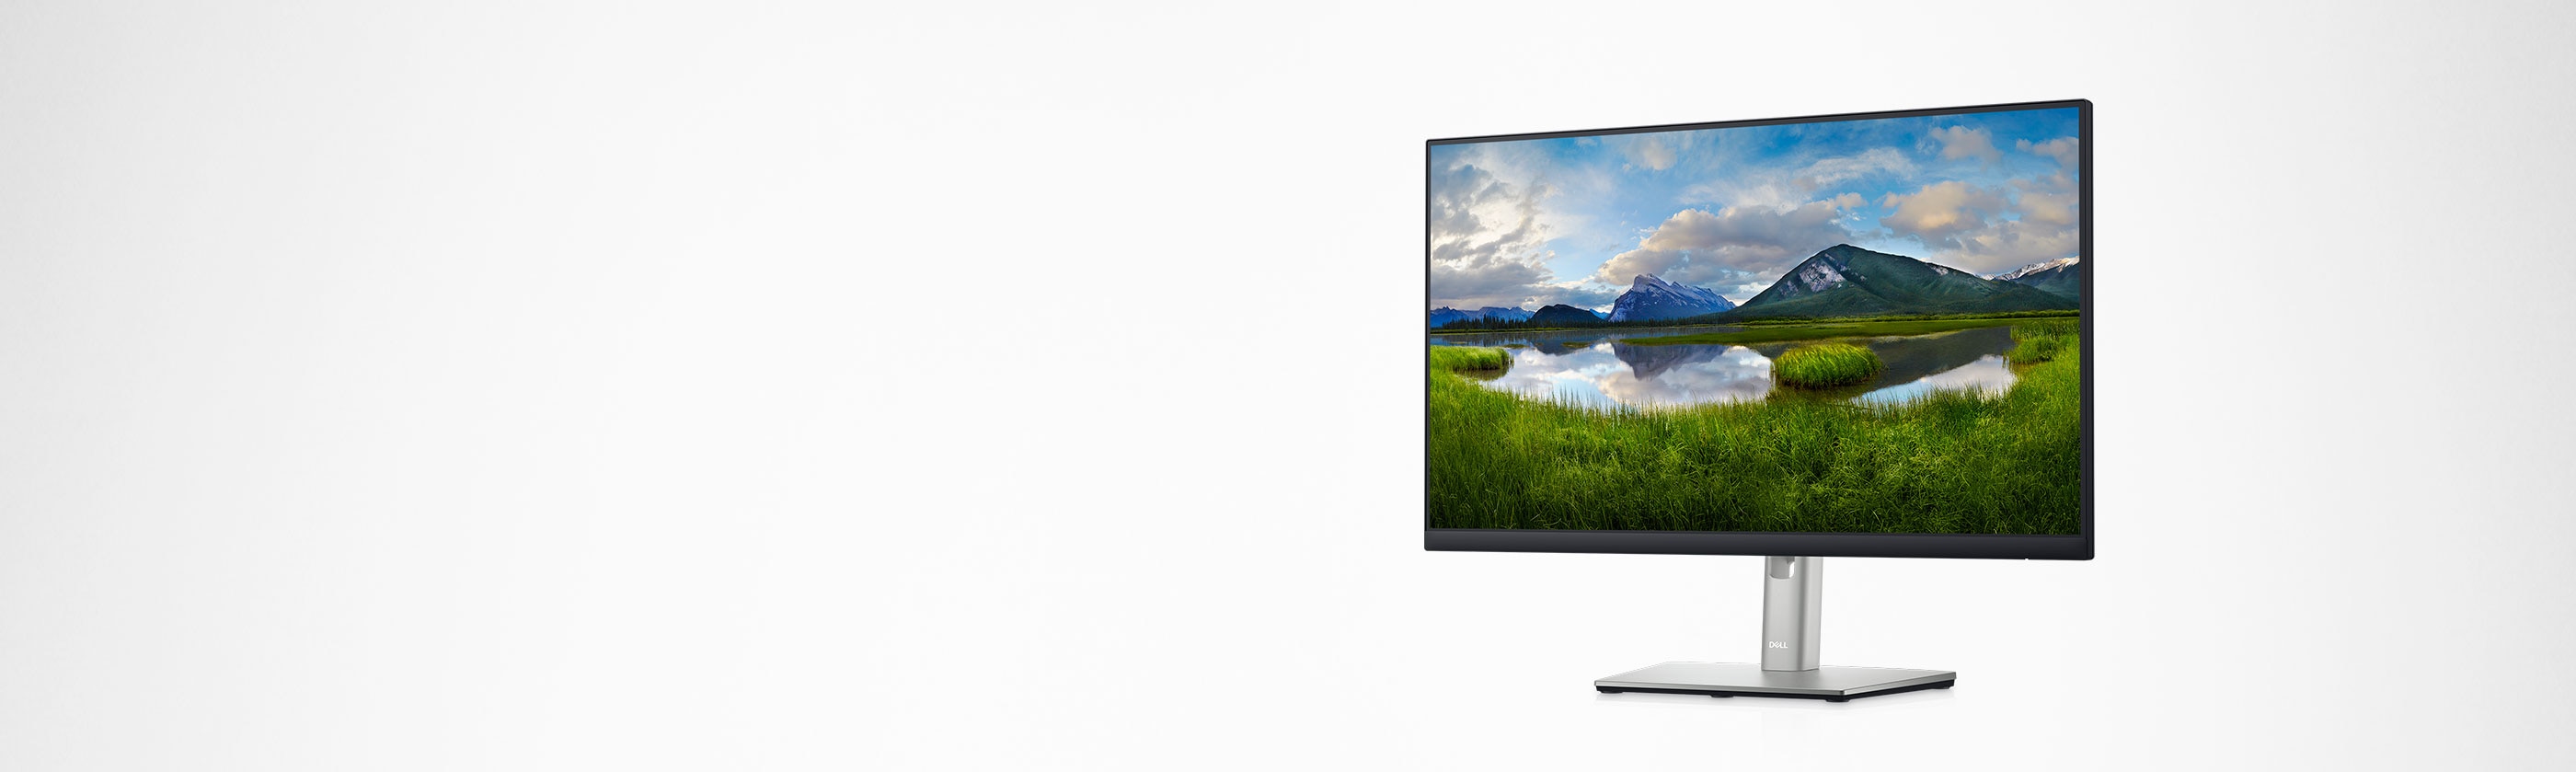 Difference Between Lcd and Led Monitors: Definition, Advantages